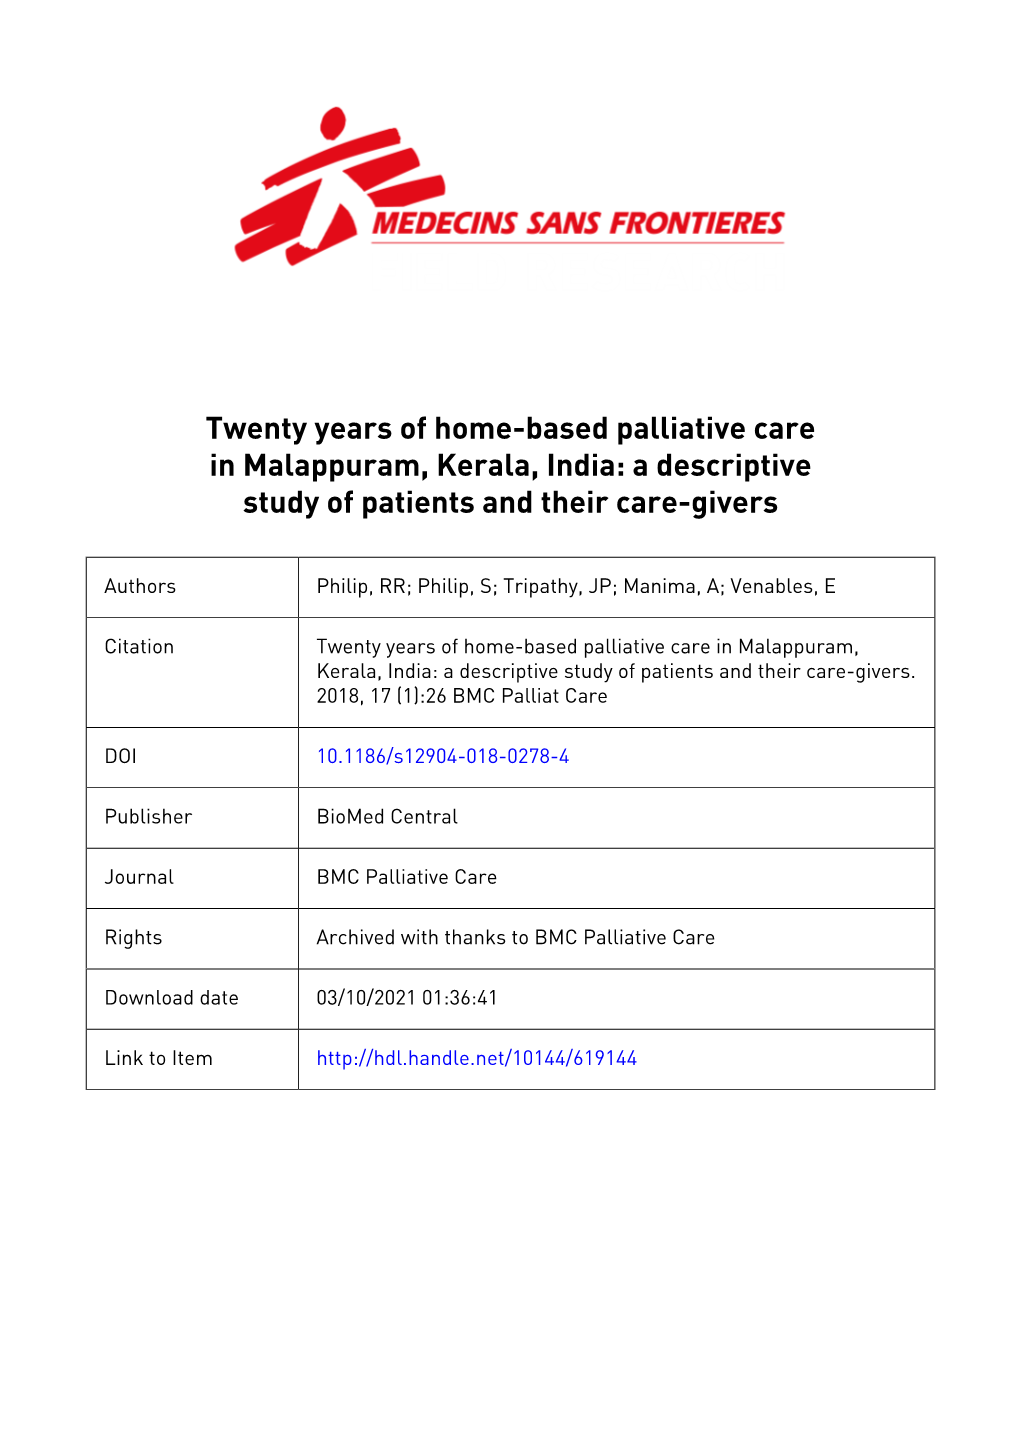 Twenty Years of Home-Based Palliative Care in Malappuram, Kerala, India: a Descriptive Study of Patients and Their Care-Givers